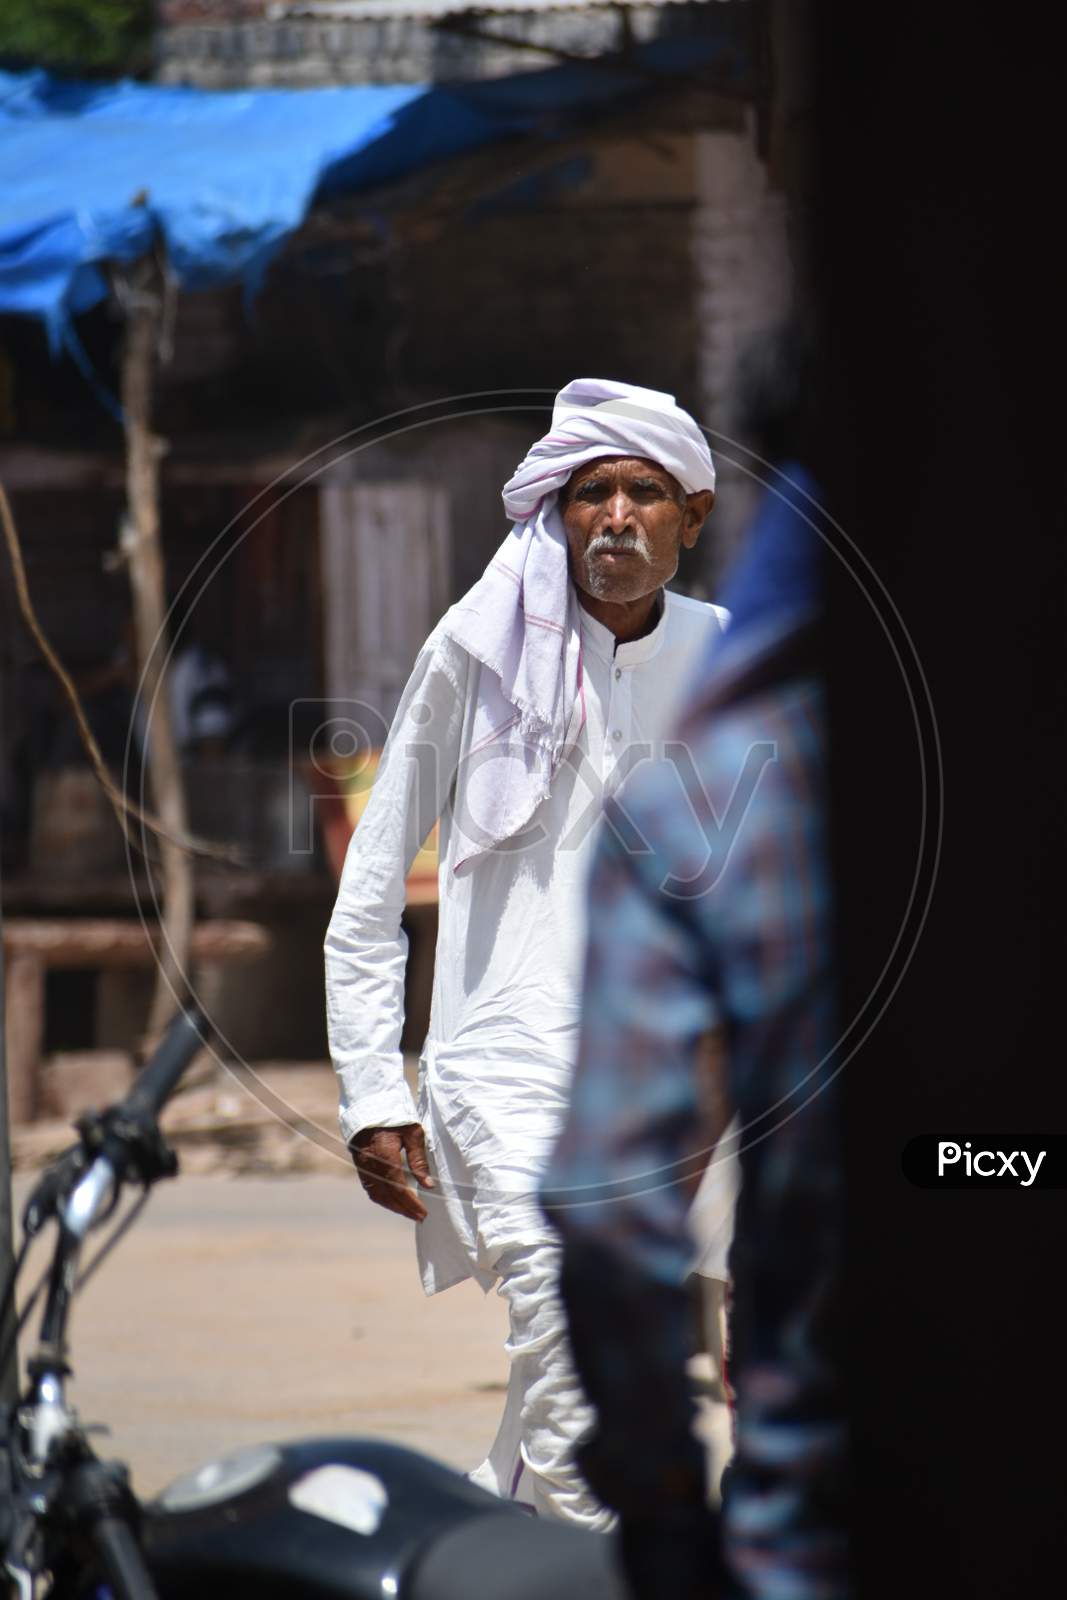 An indian old man walking on street of a town market.